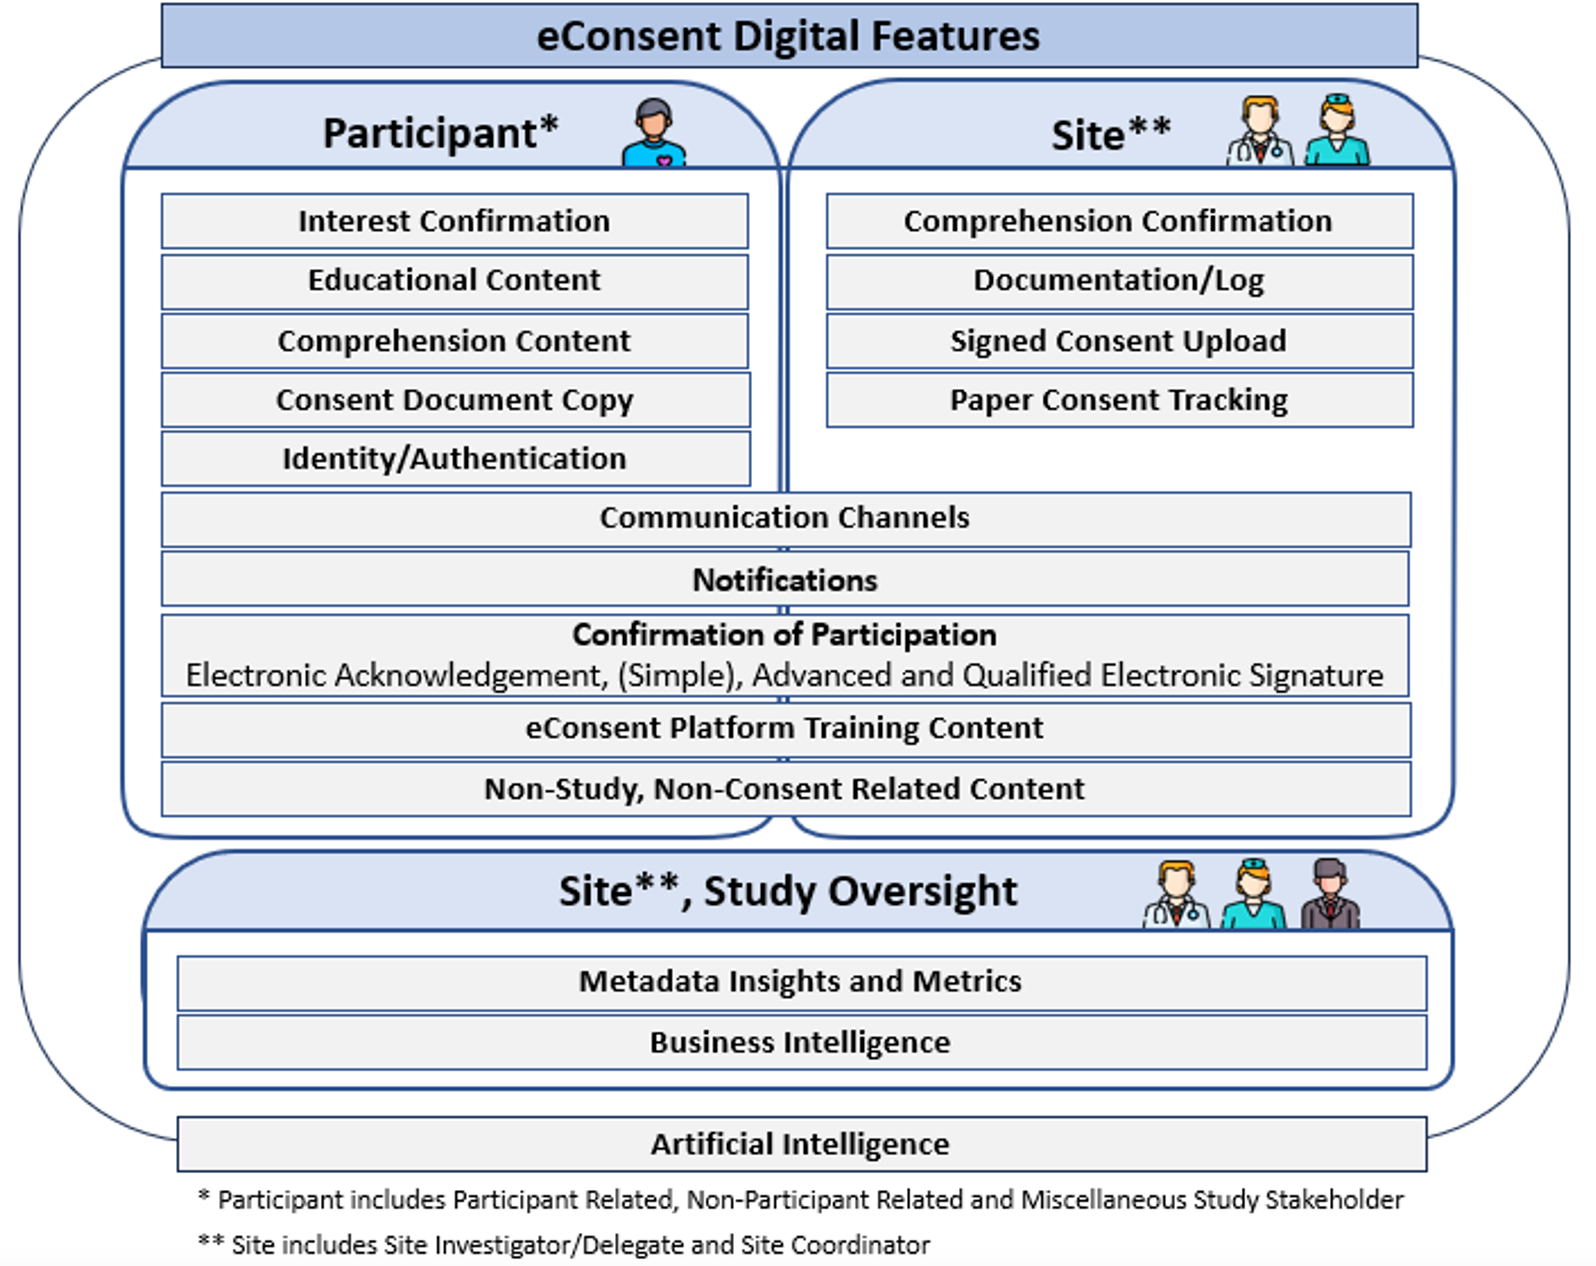 Figure 2. Overview of eConsent Digital Features and Stakeholders’ Applicability.